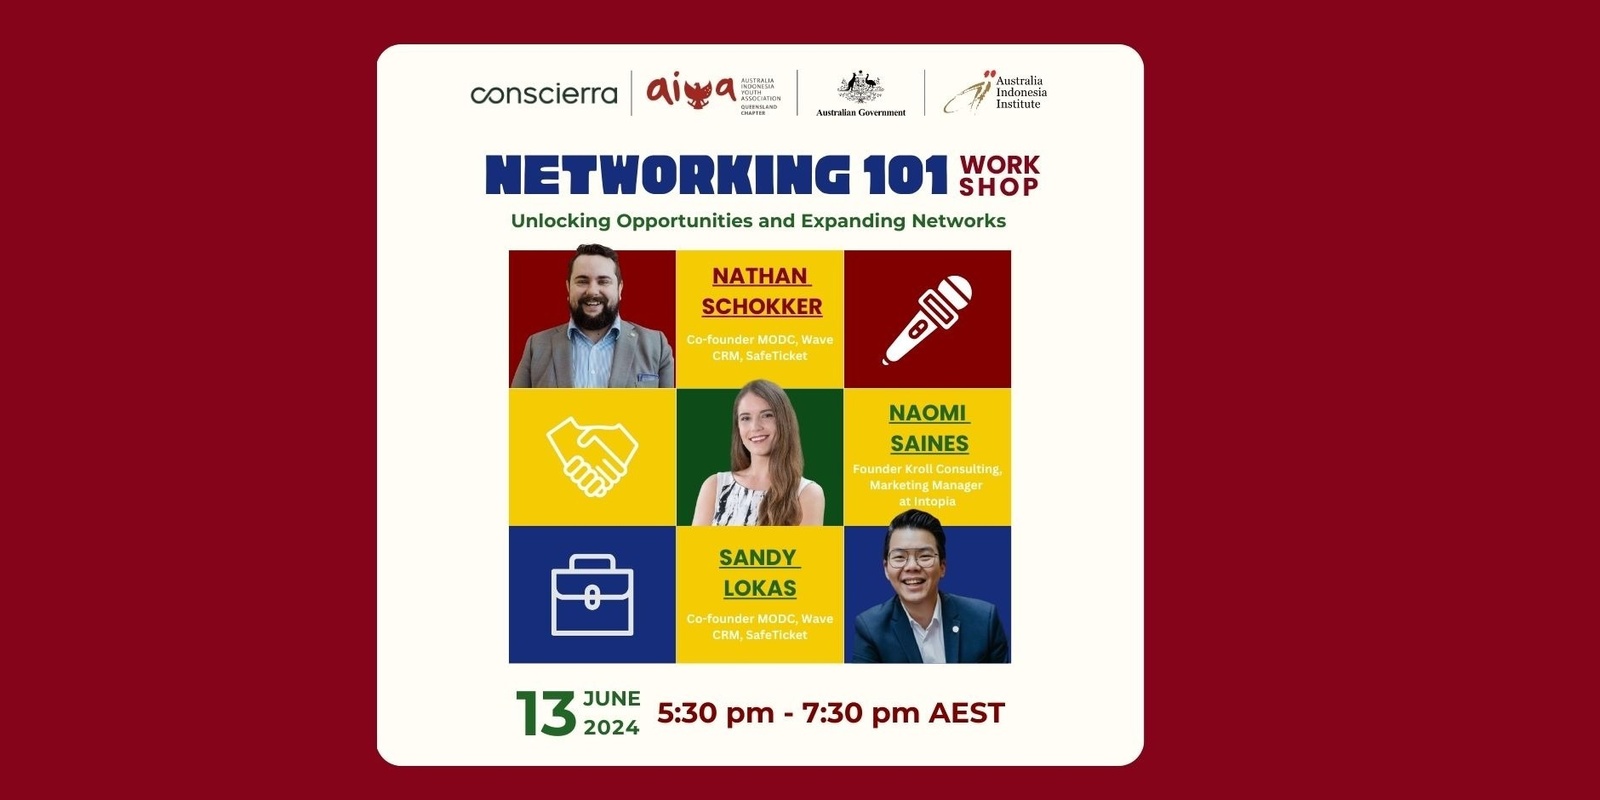 Banner image for Networking 101 Workshop with AIYA Queensland